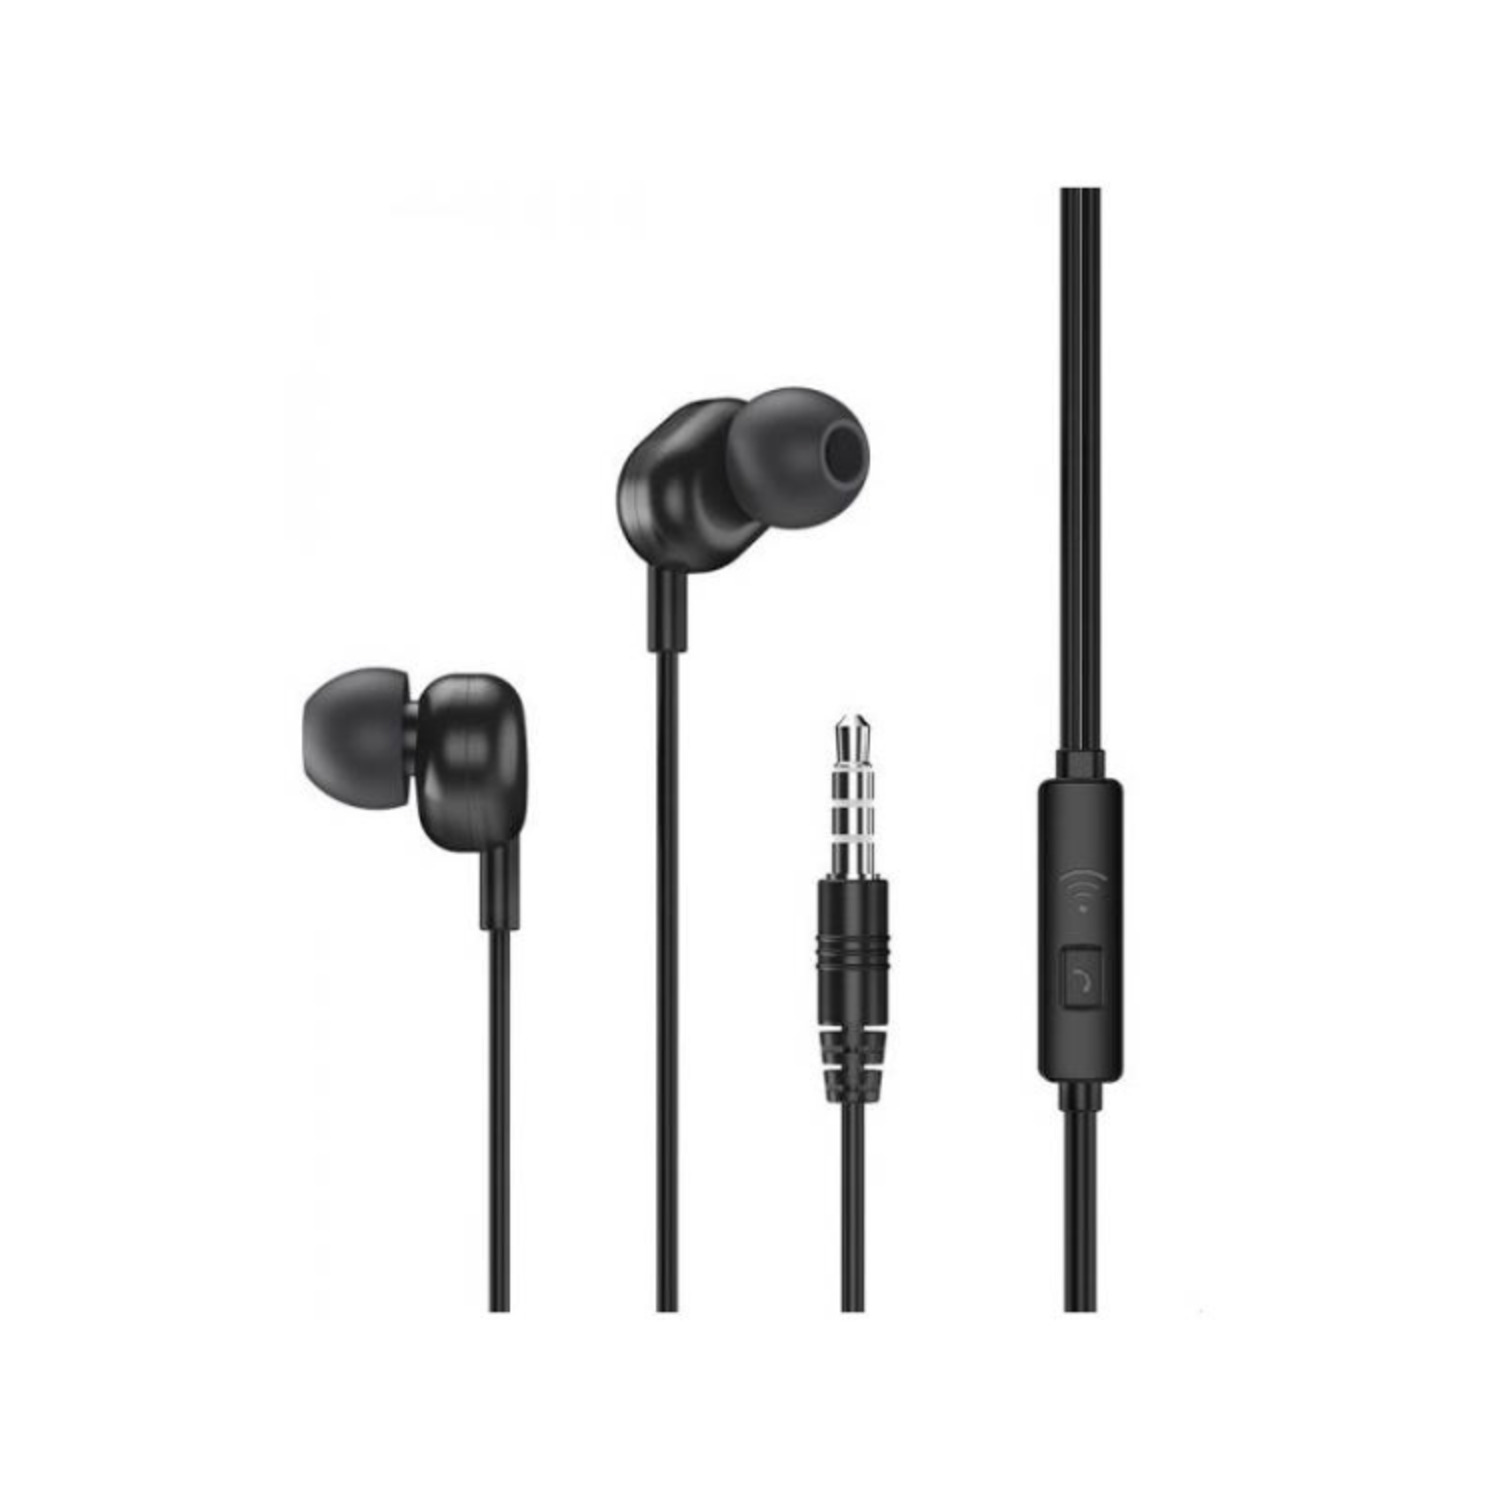 Remax RW-105 Hi-Res Audio Wired Stereo Earphones with One-Button Control - Black